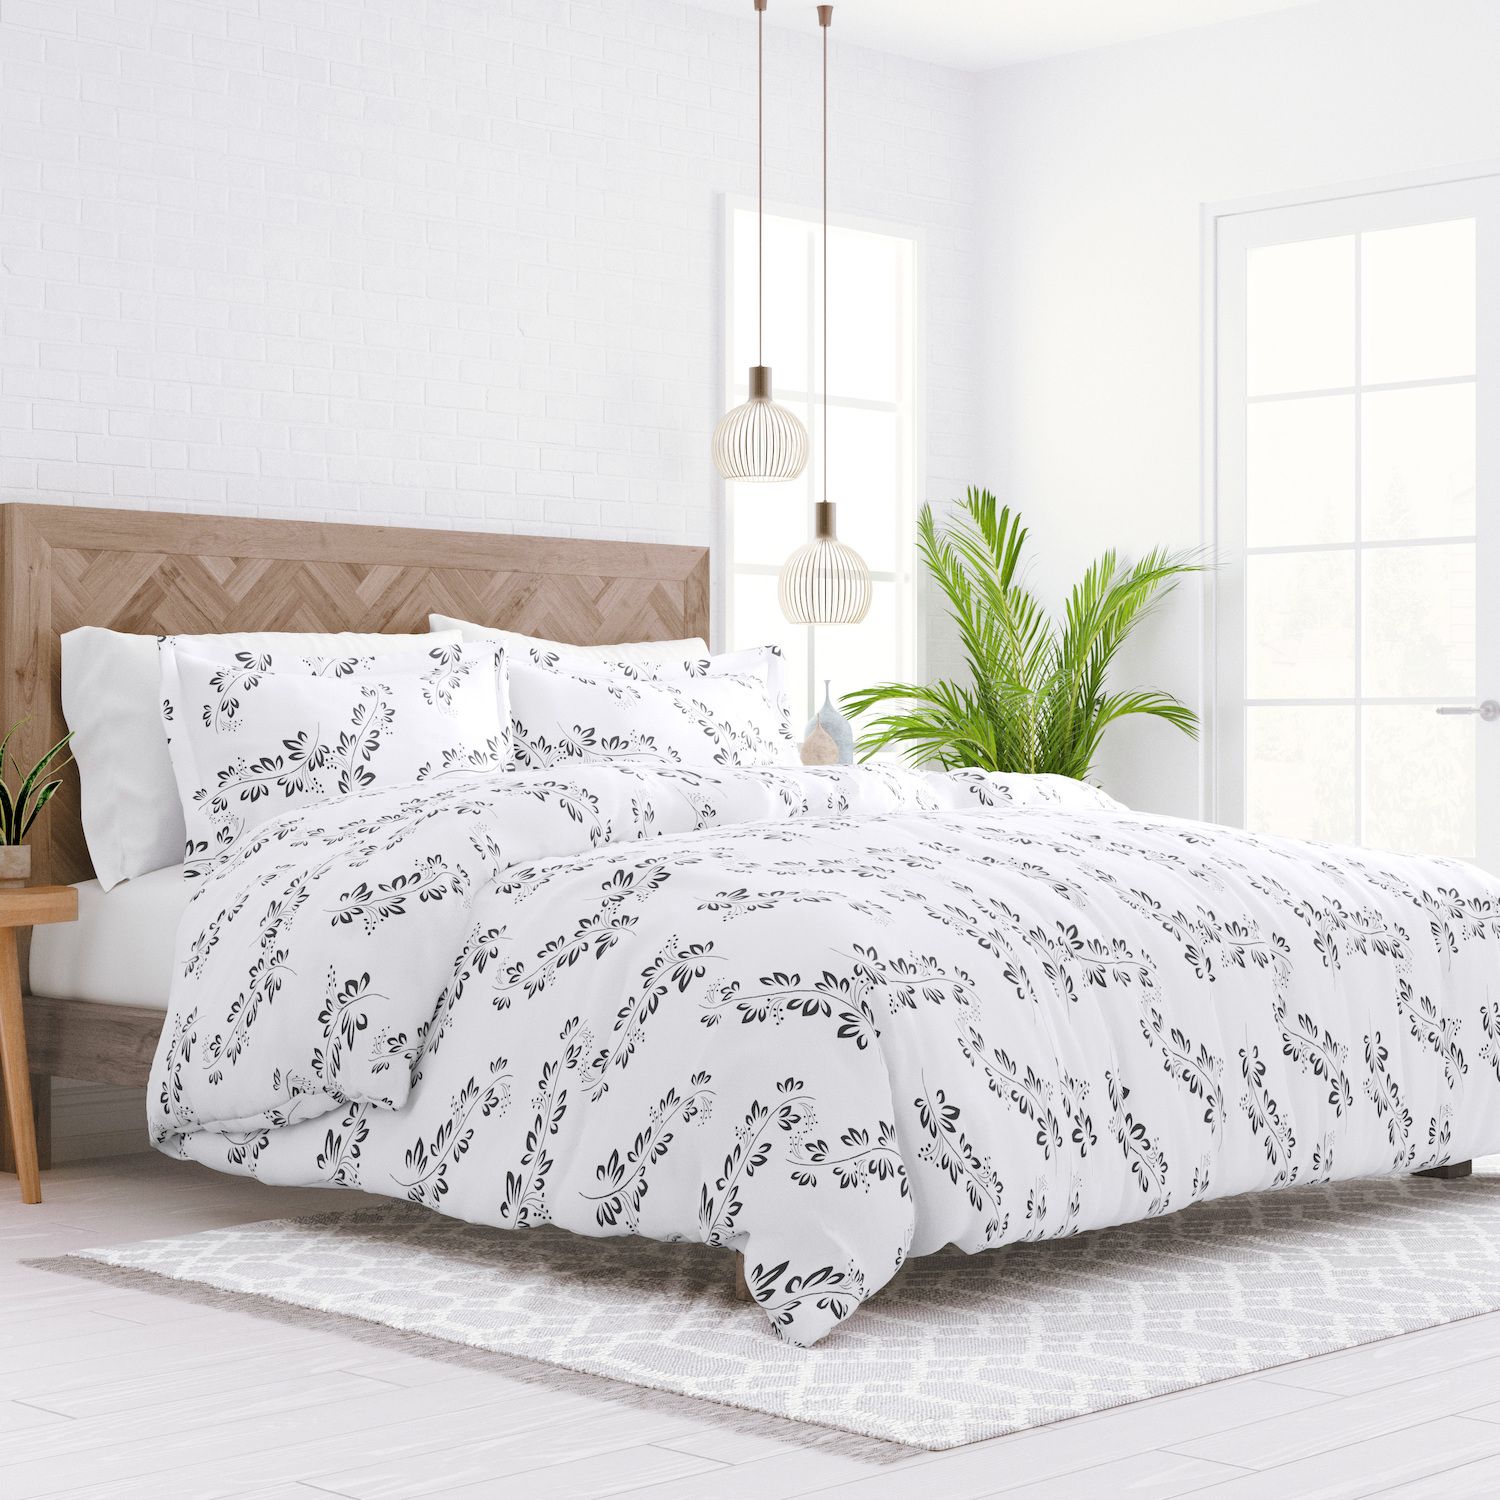 Image for Home Collection Premium Ultra Soft 3-Piece Simple Vine Print Duvet Cover Set at Kohl's.